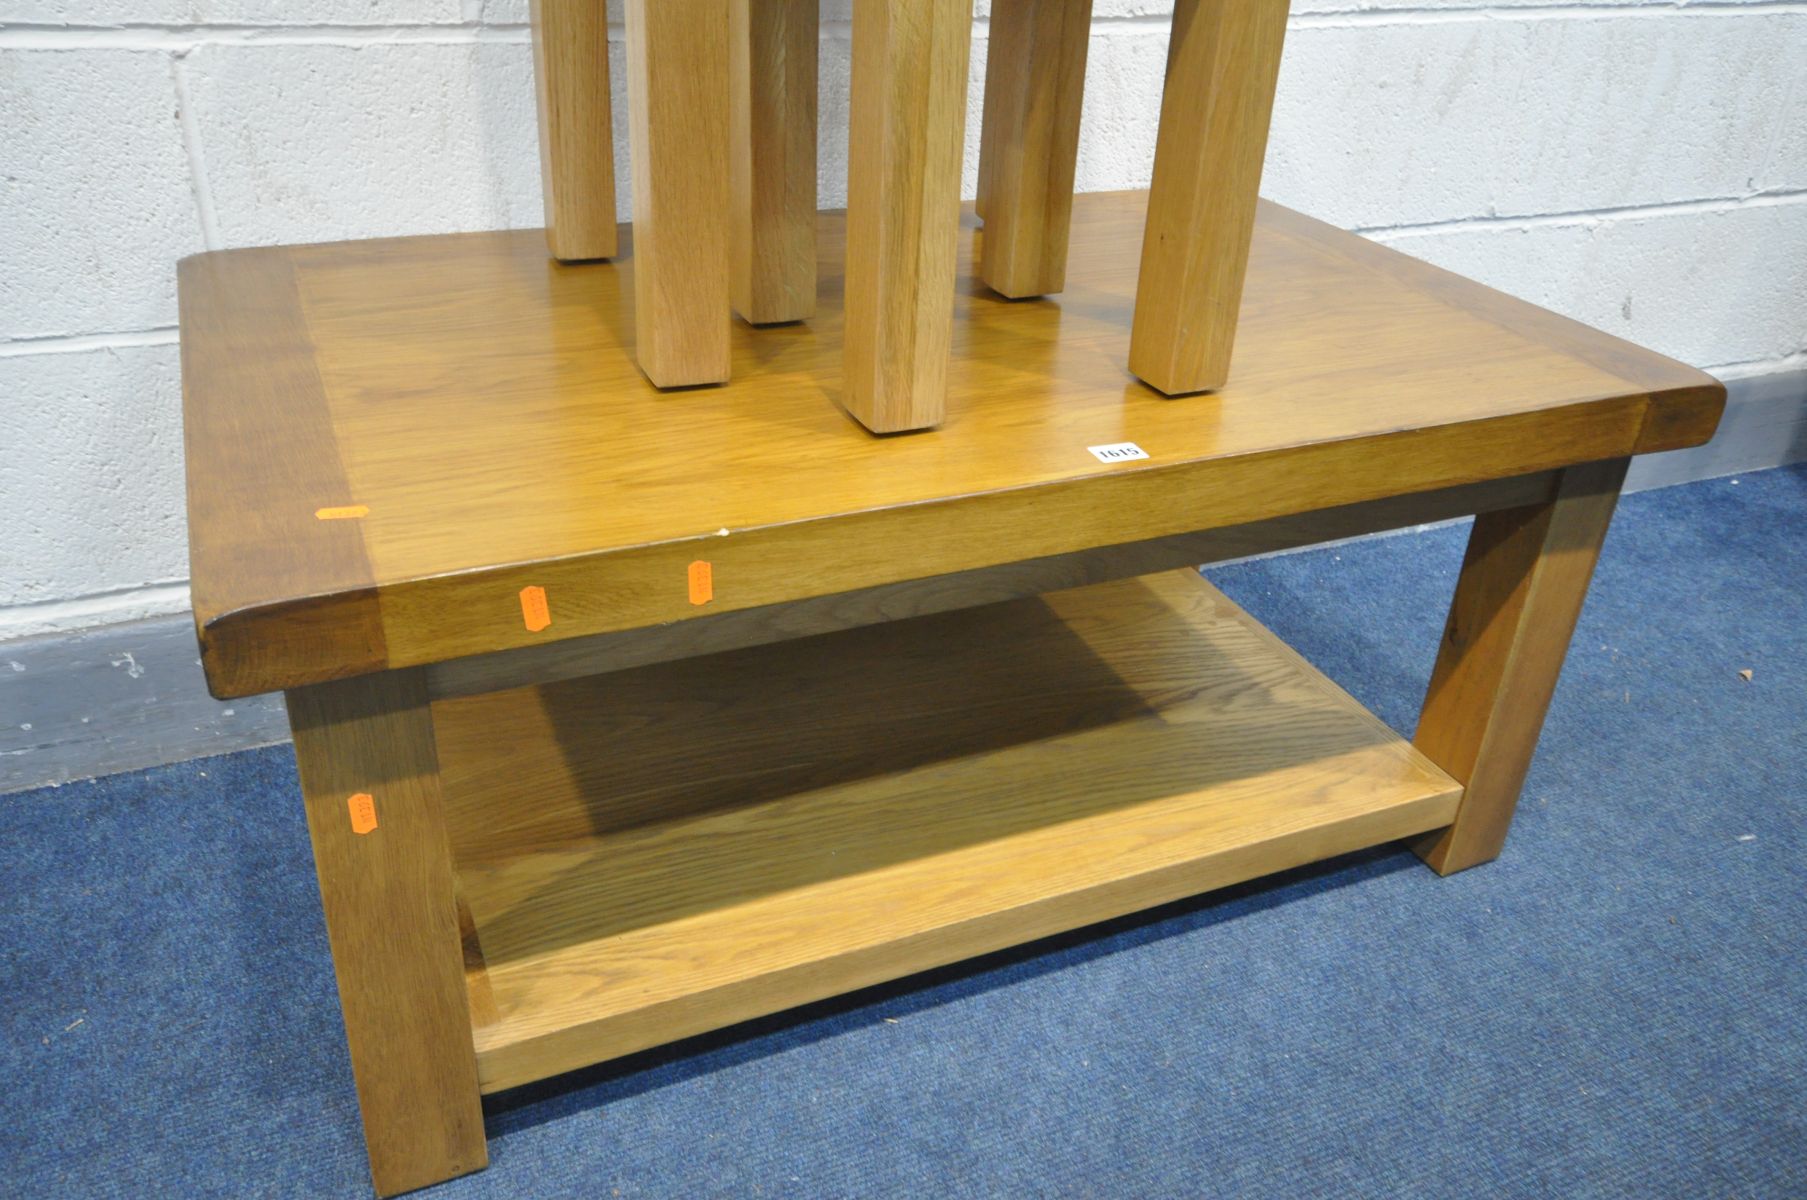 A SOLID GOLDEN OAK COFFEE TABLE with an undershelf, length 100cm x depth 60cm x height 45cm, along - Image 3 of 3